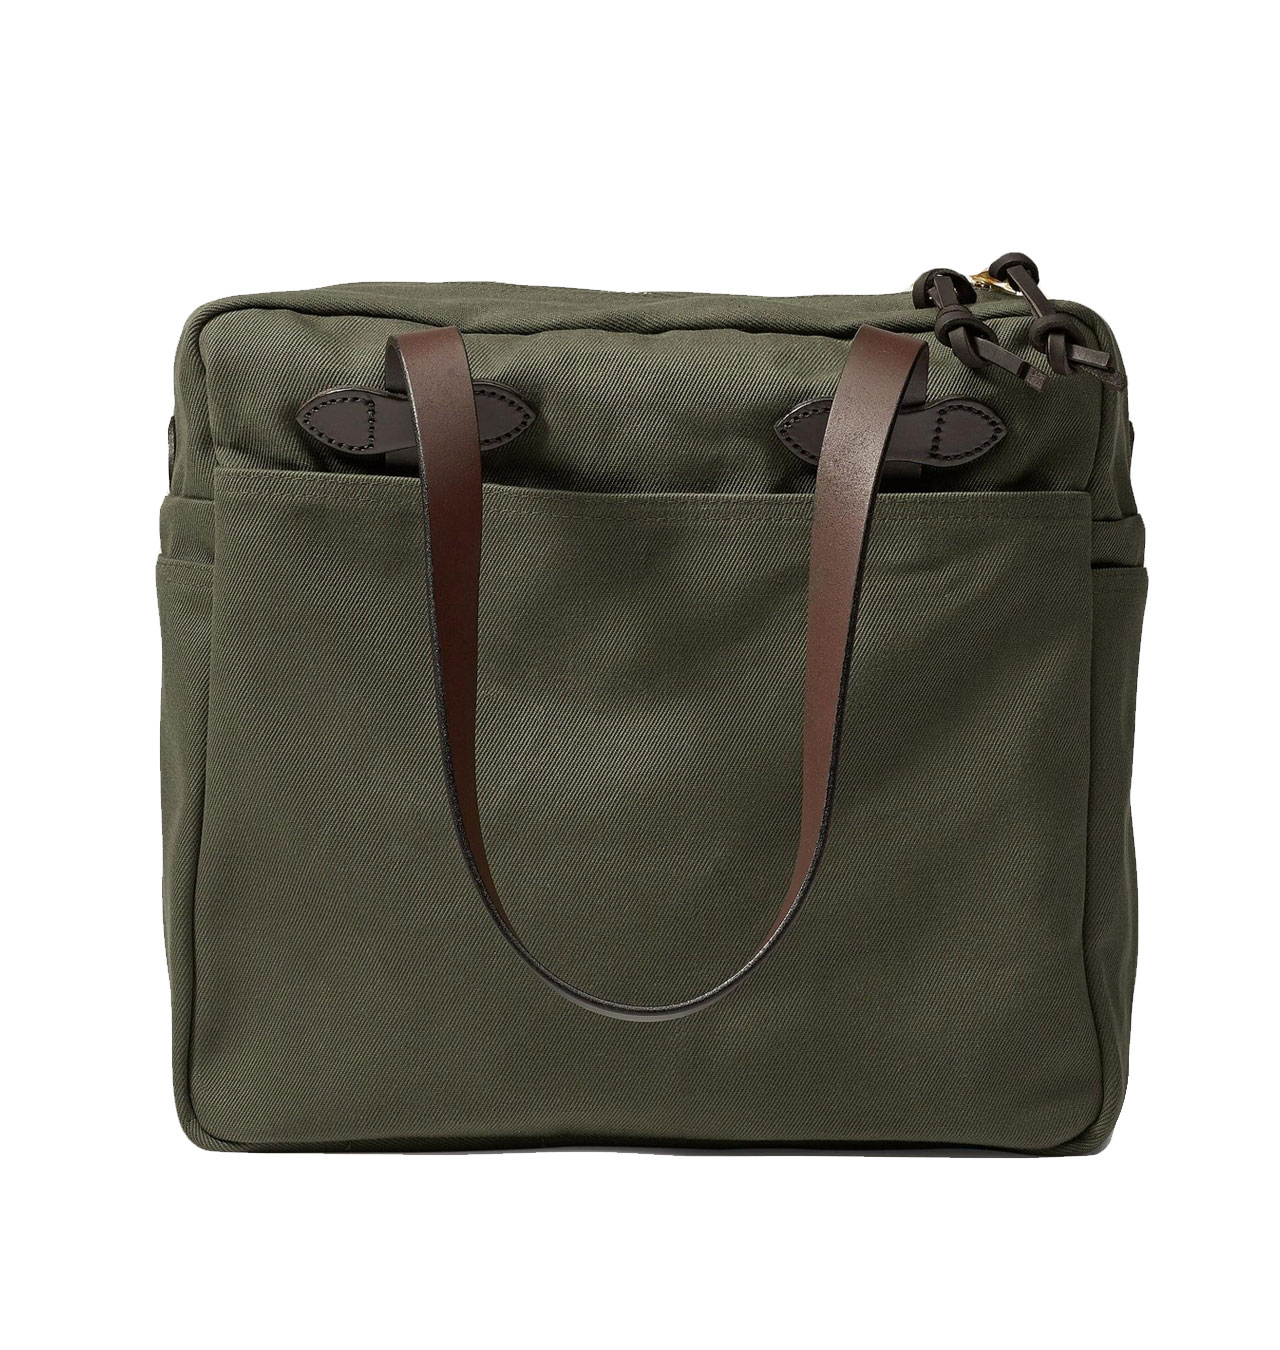 Filson---Tote-Bag-With-Zipper---Otter-Green-1